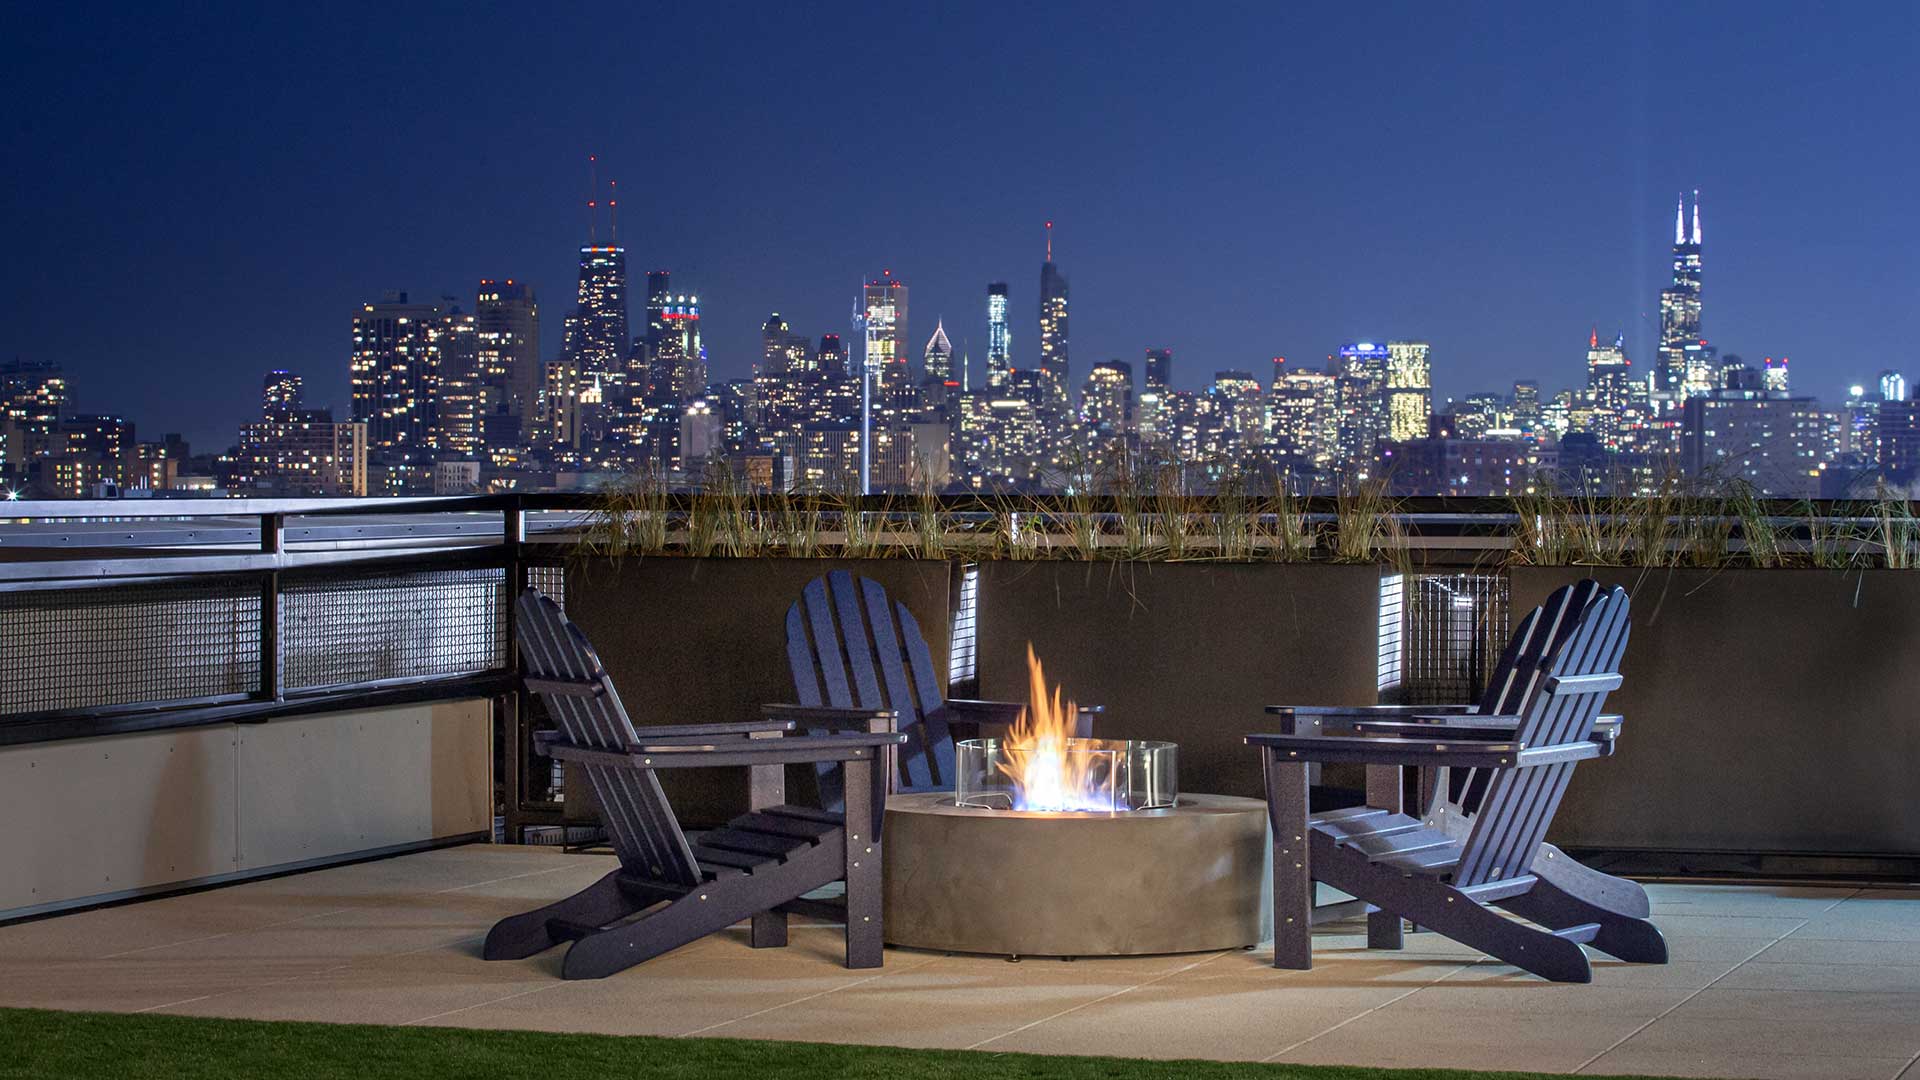 Standing before the fire pit are on the rooftop deck at Wrigleyville Lofts with the Chicago skyline seen in the distance at night.